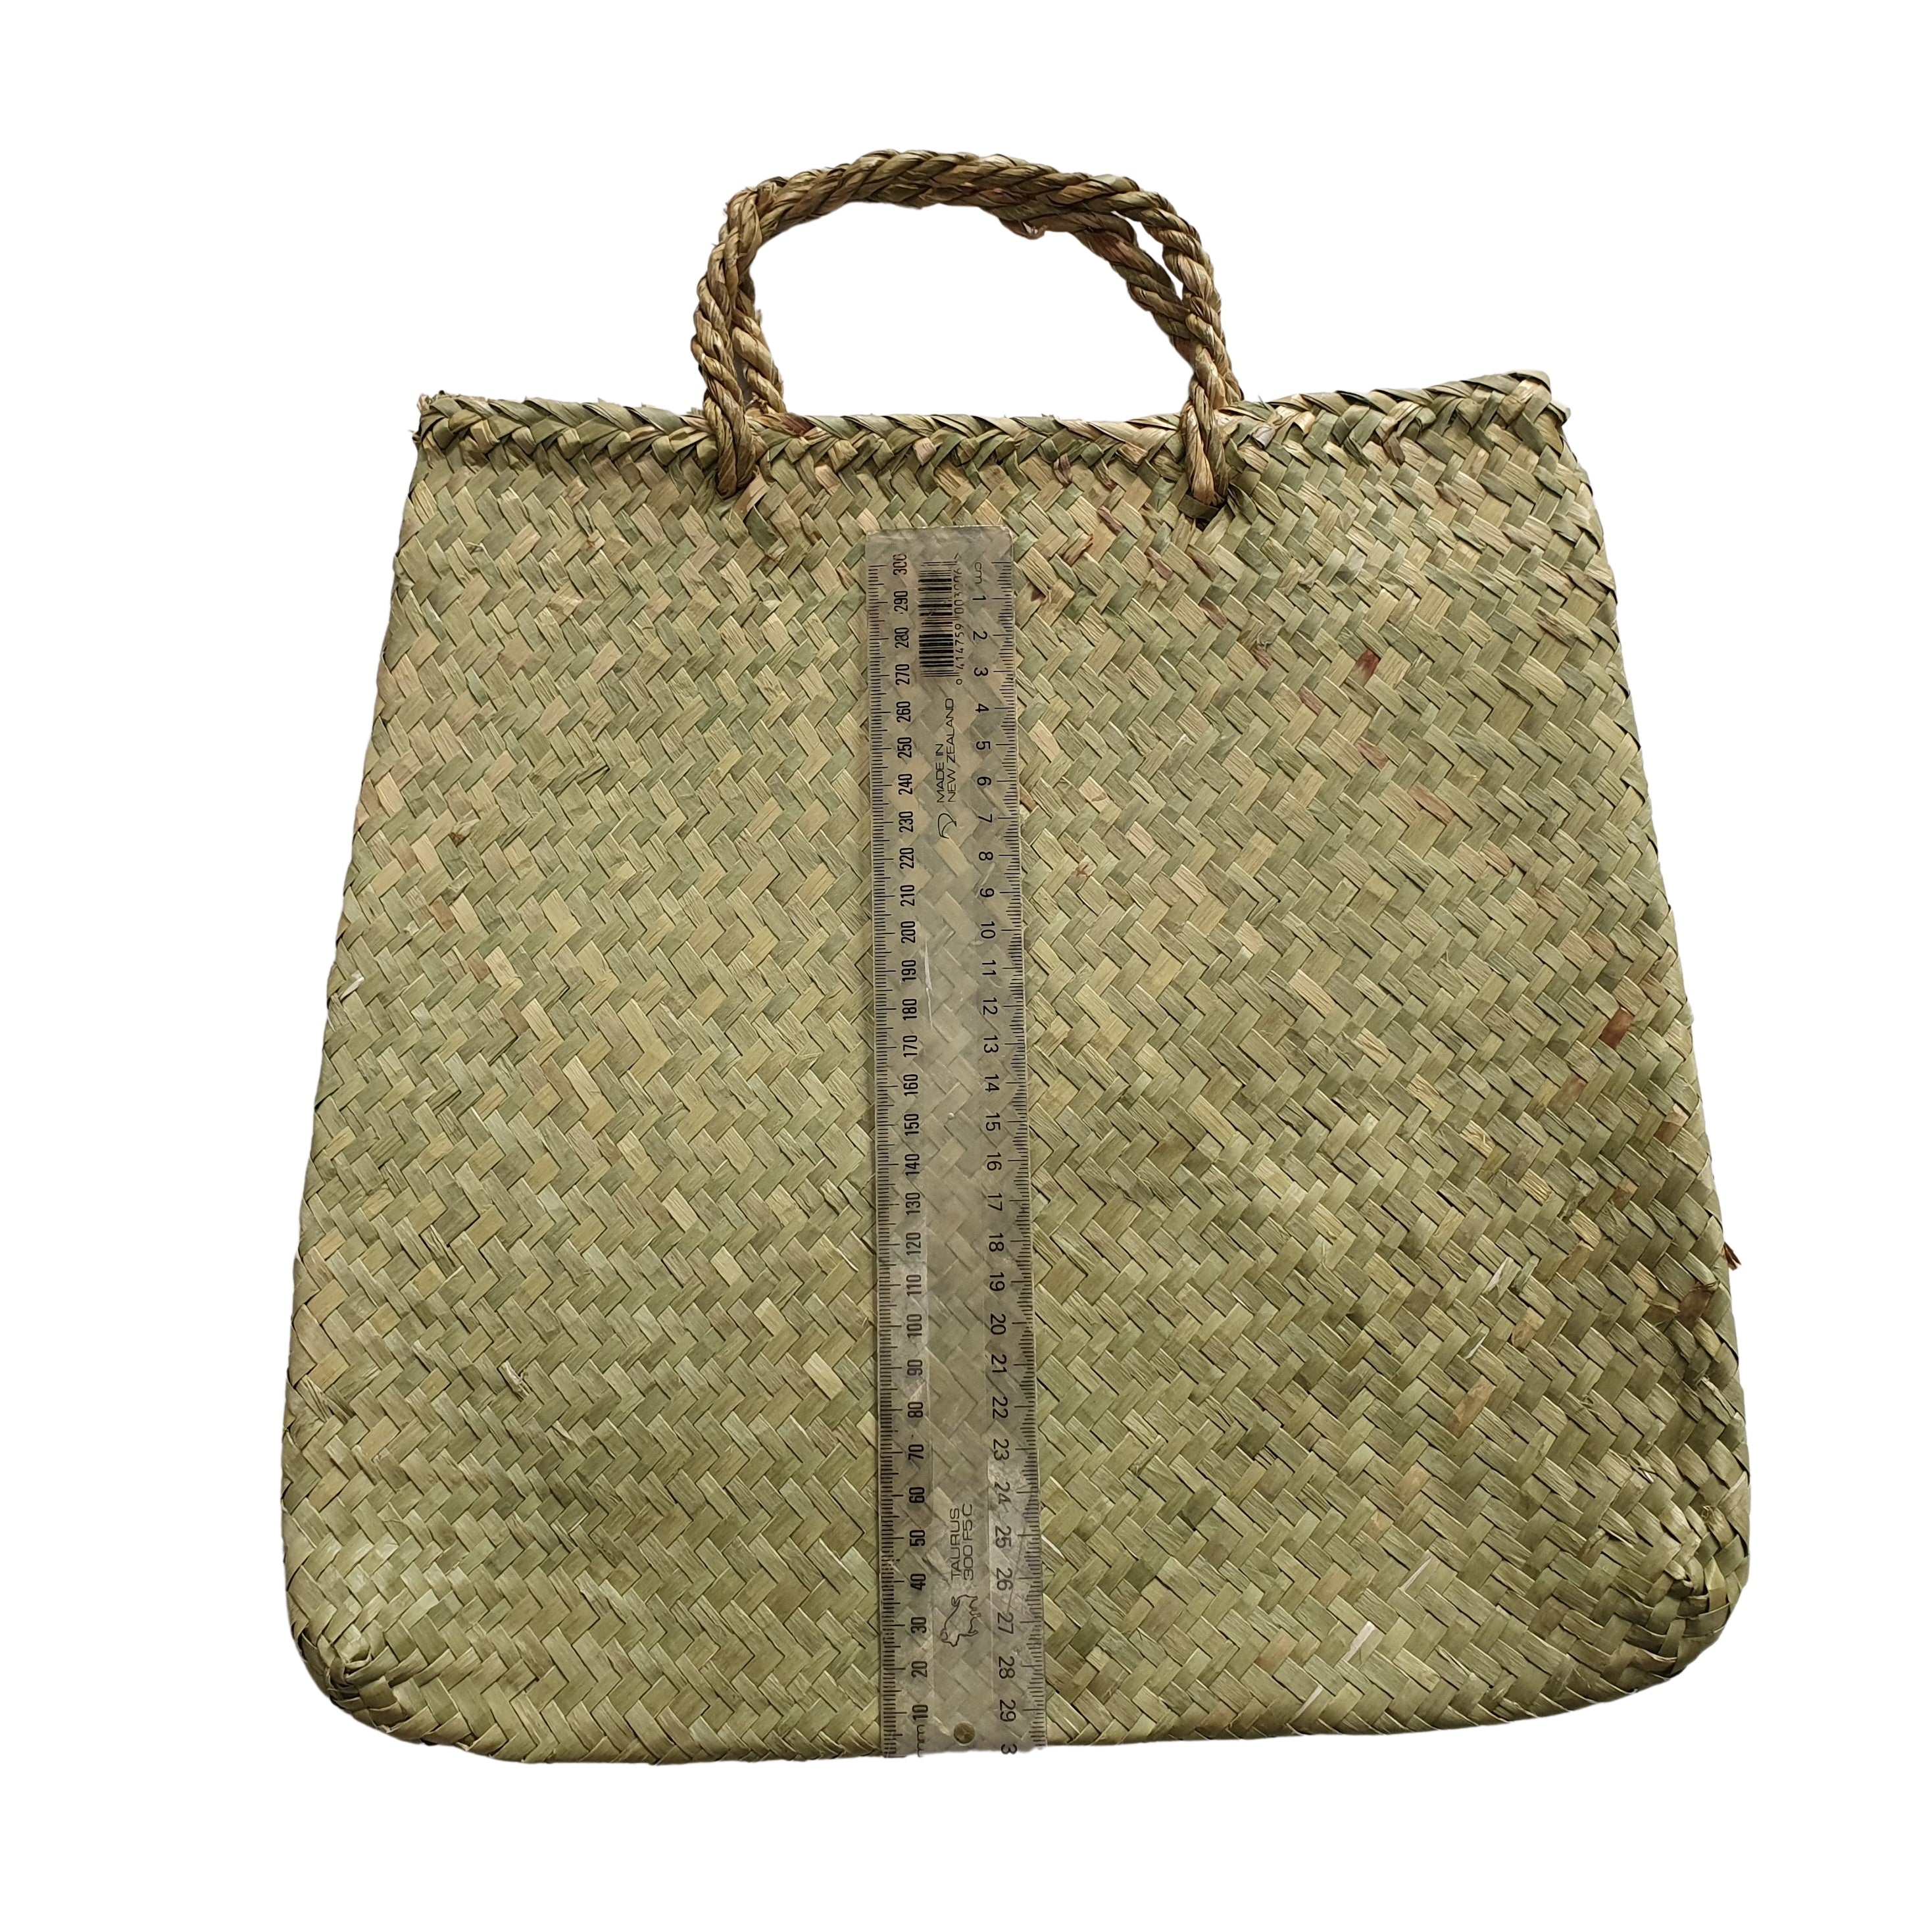 Woven Kete - Large and Medium